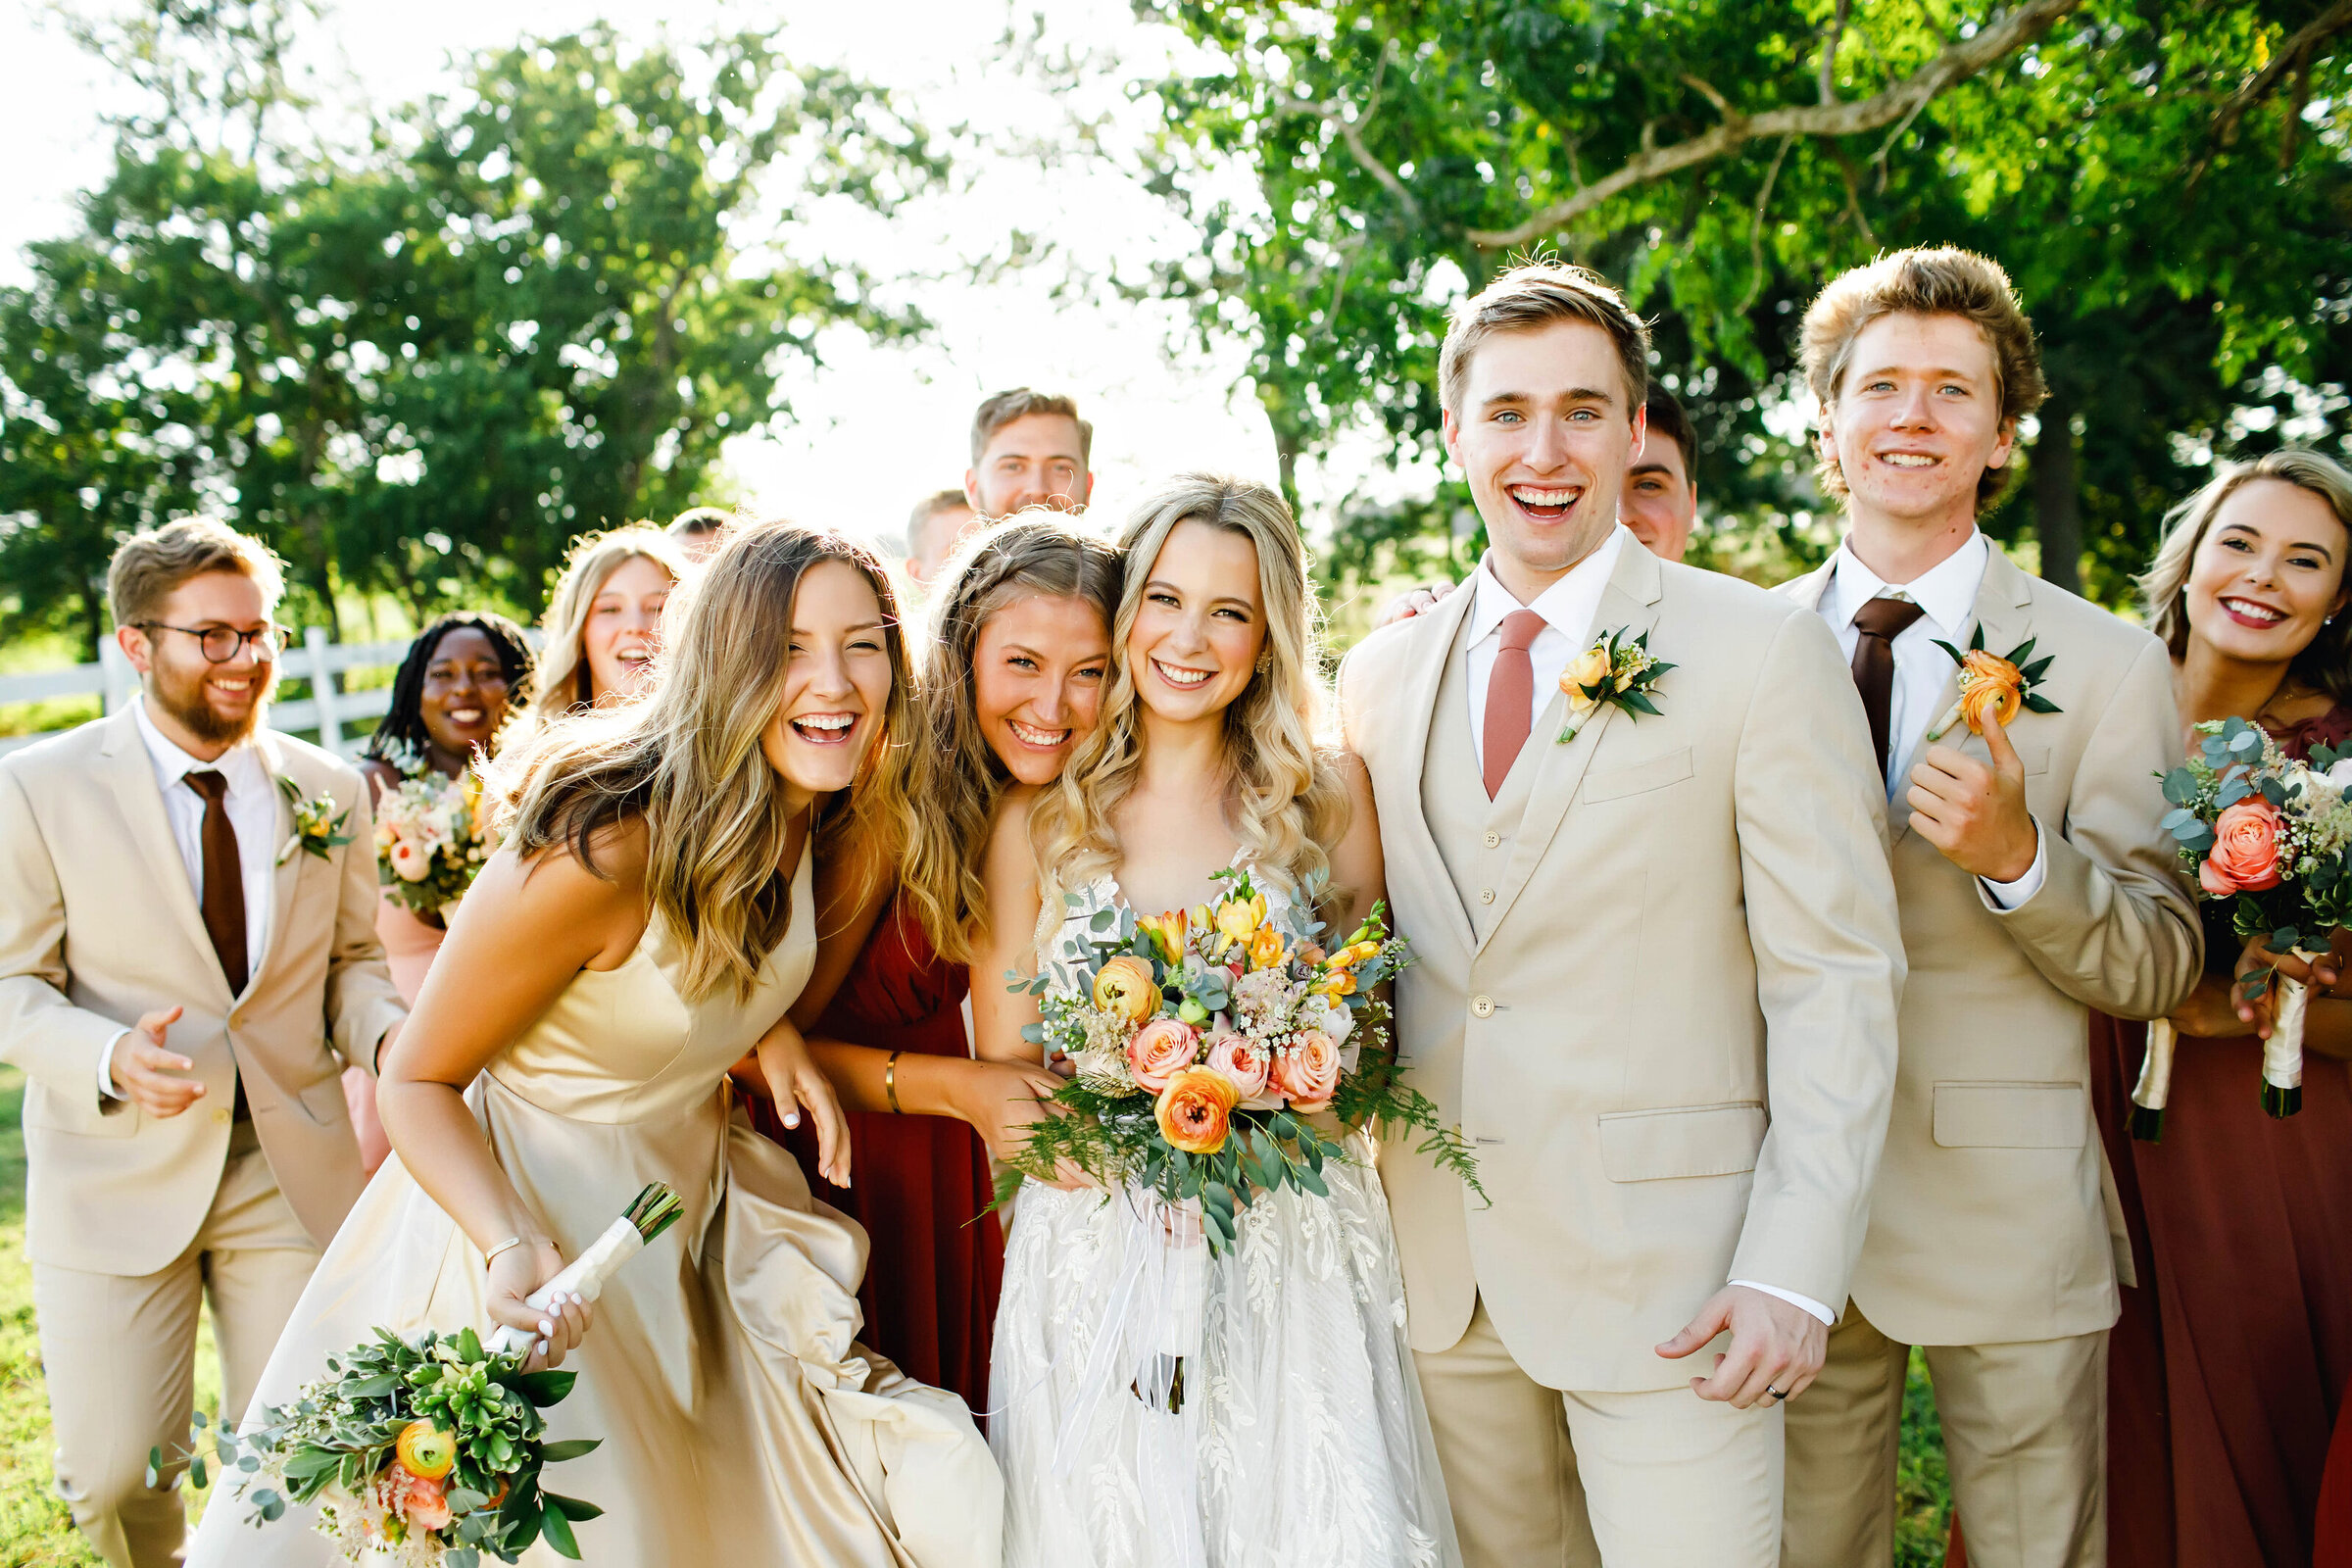 A bright and colorful wedding party photo. The bridal party is gathered around the bride and groom and everyone is smiling